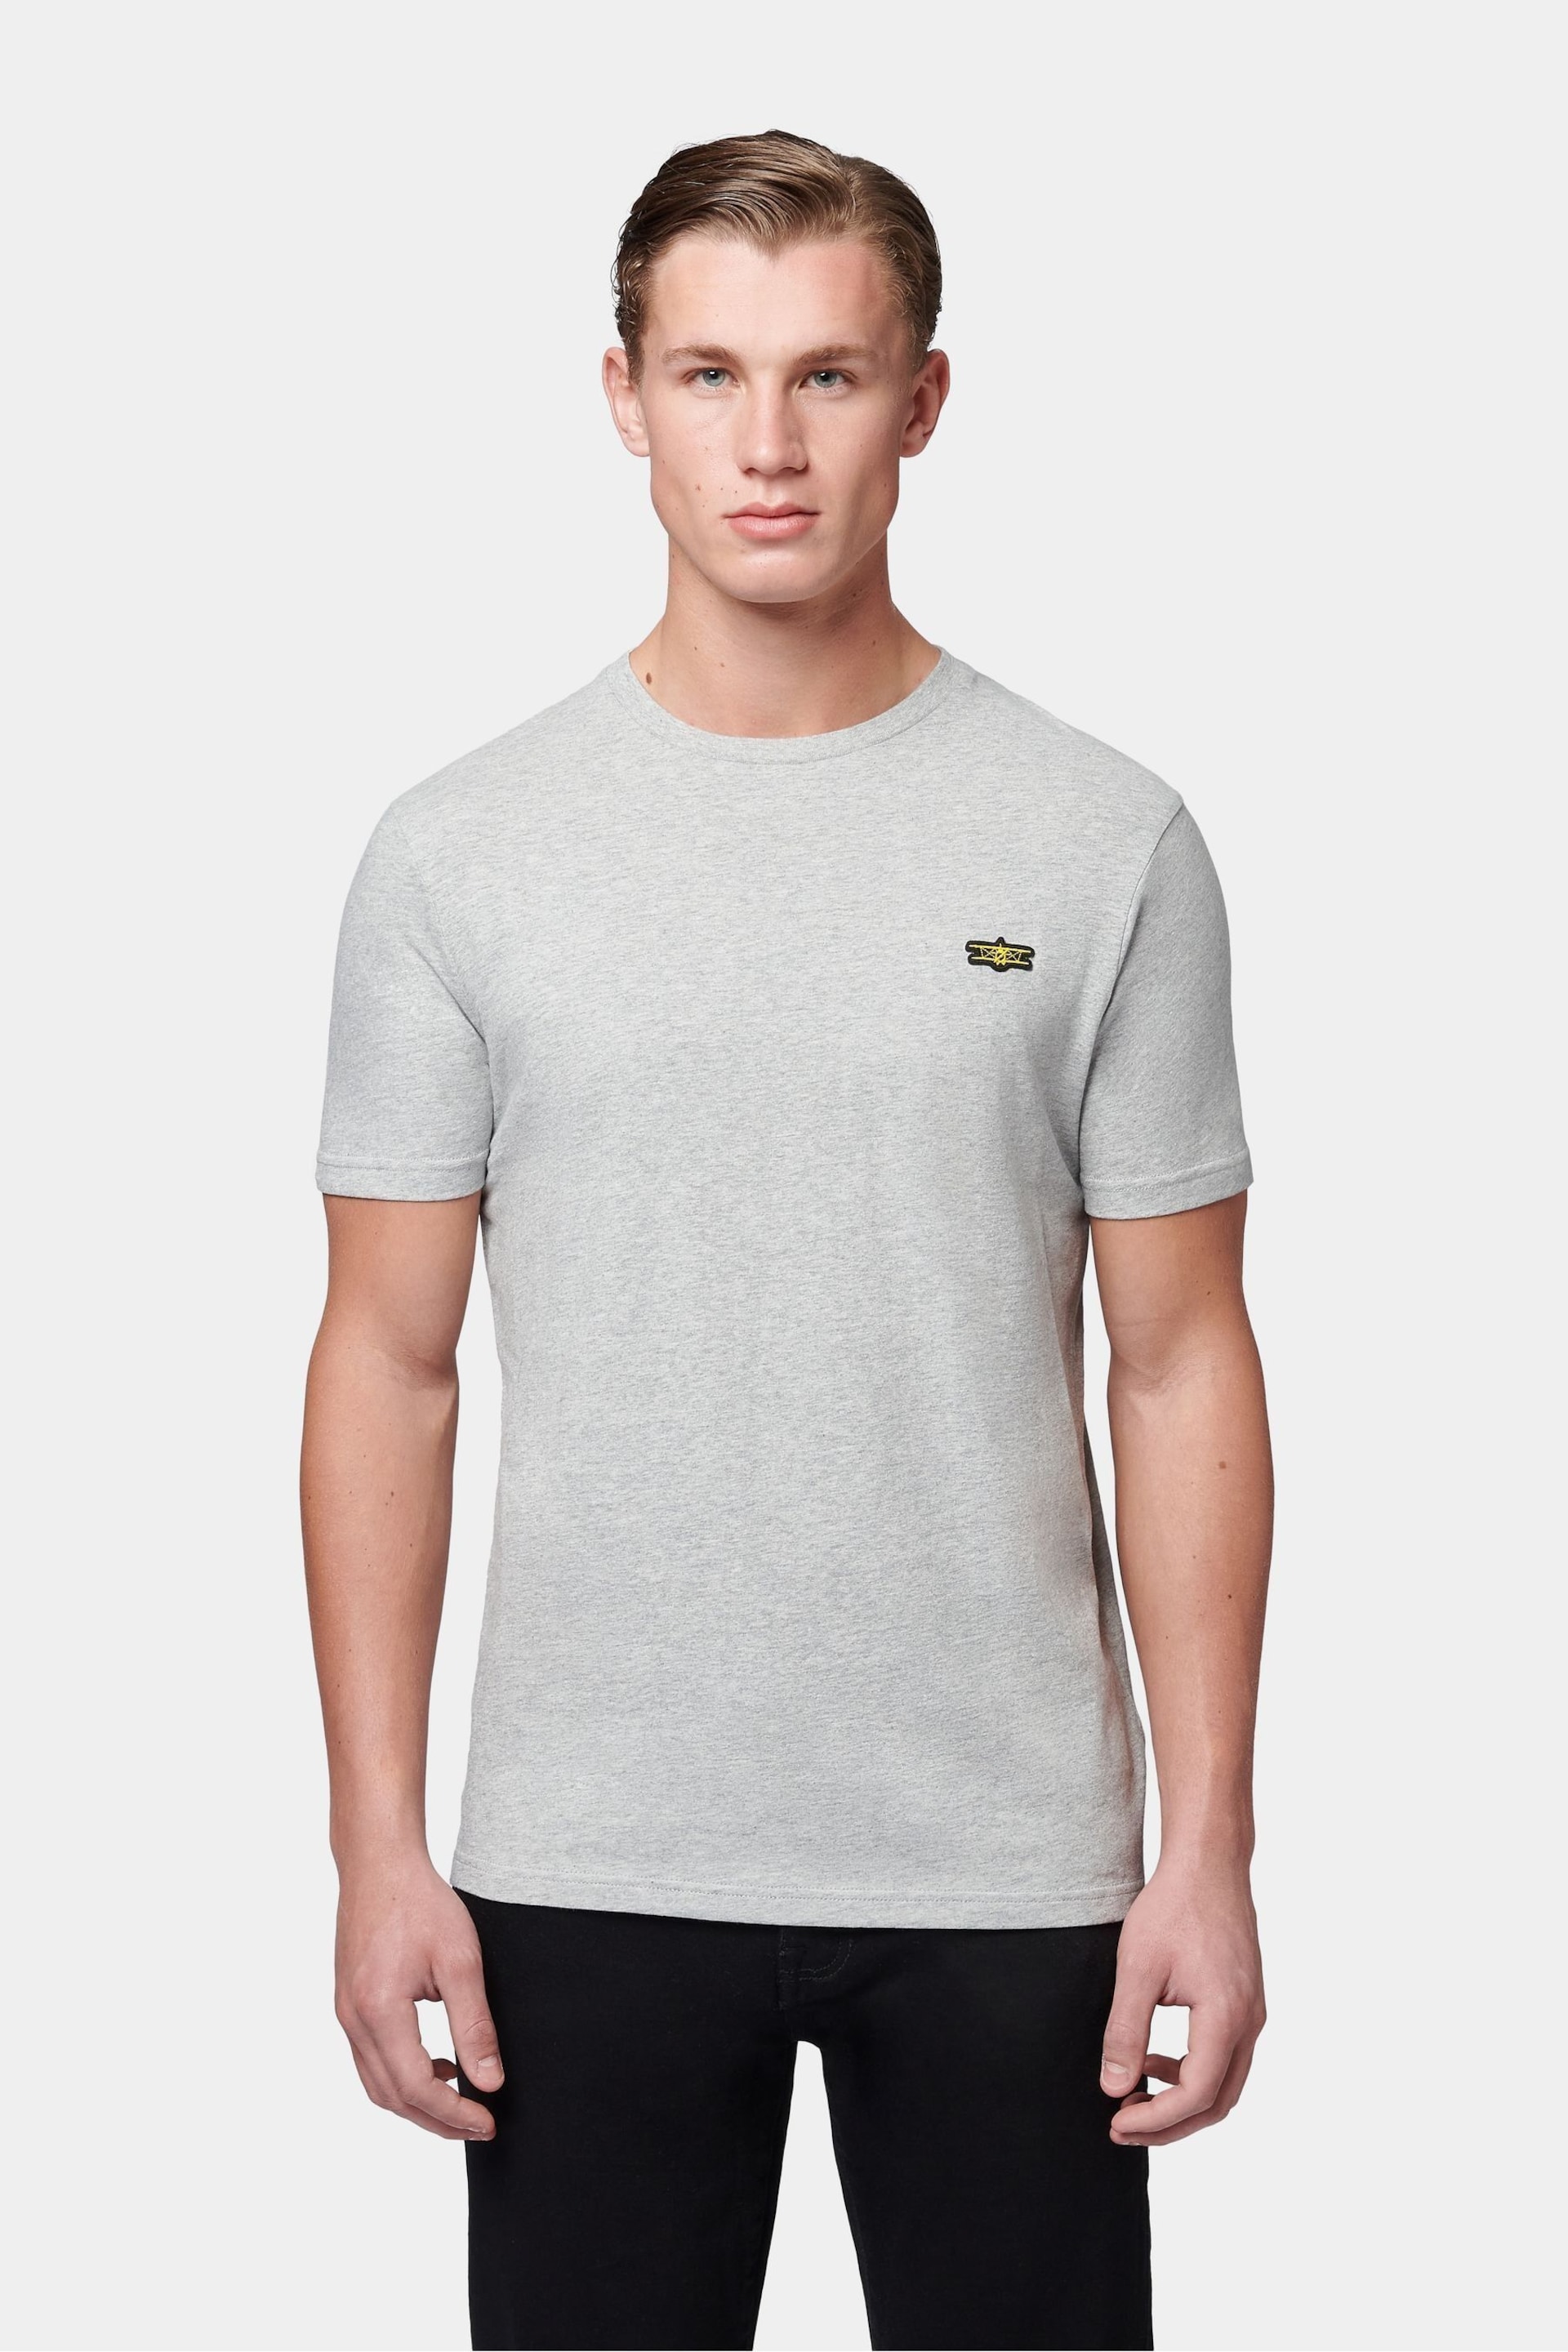 Flyers Mens Classic Fit T-Shirt - Image 1 of 8